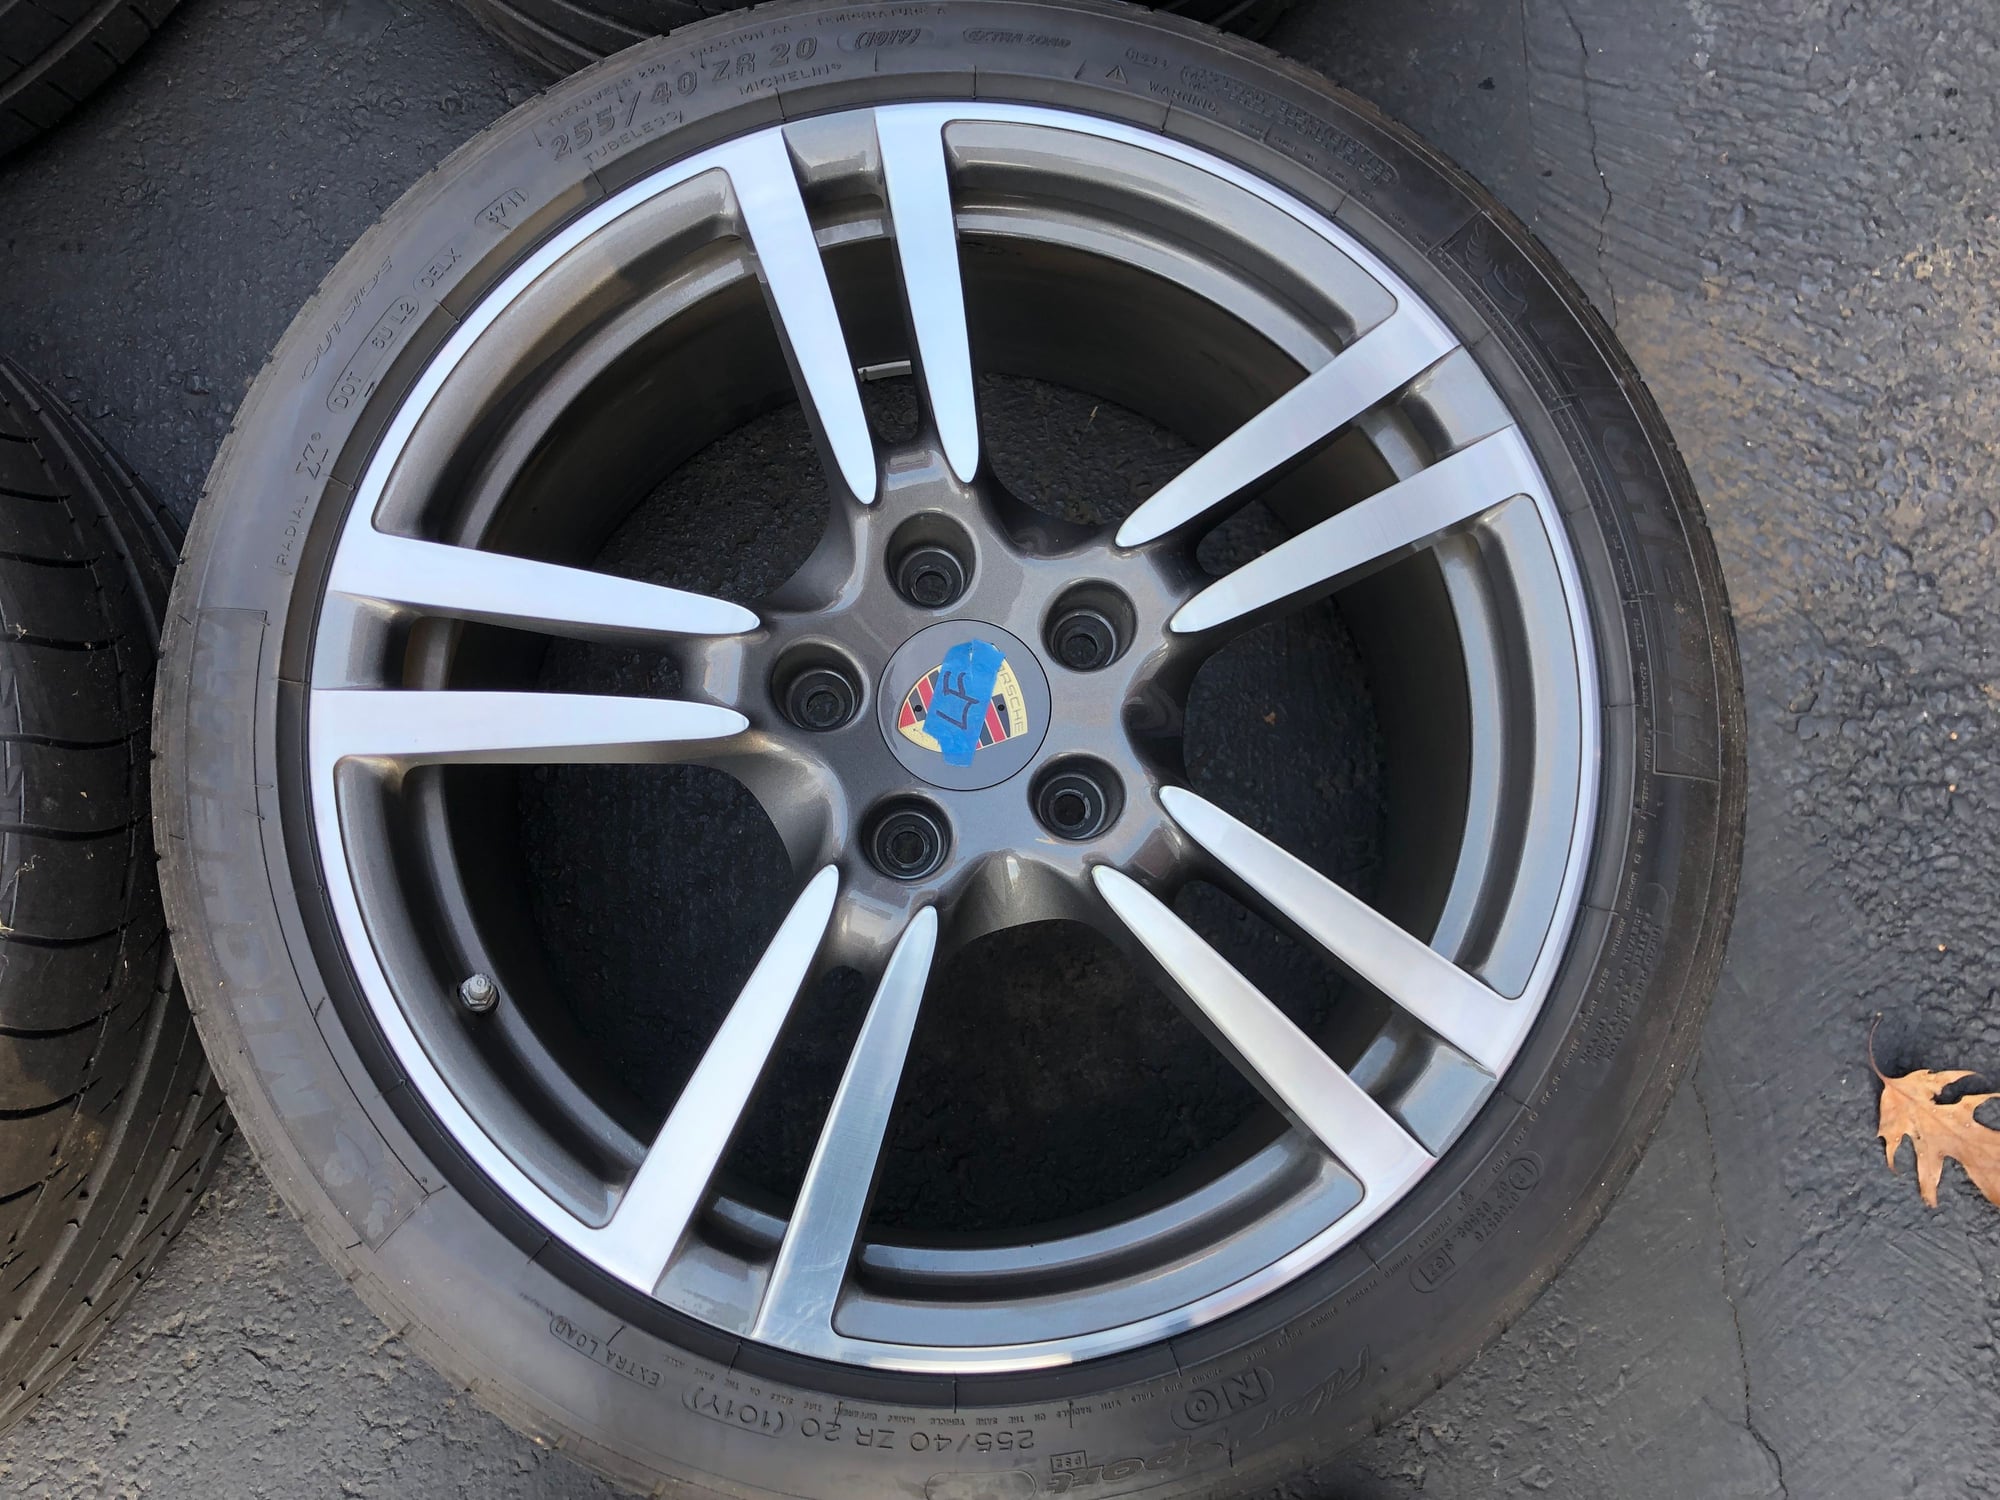 Wheels and Tires/Axles - Cayenne/Panamera Porsche Turbo II Wheels, Tires, TPMS - Used - 2010 to 2019 Porsche All Models - Stratford, CT 06614, United States